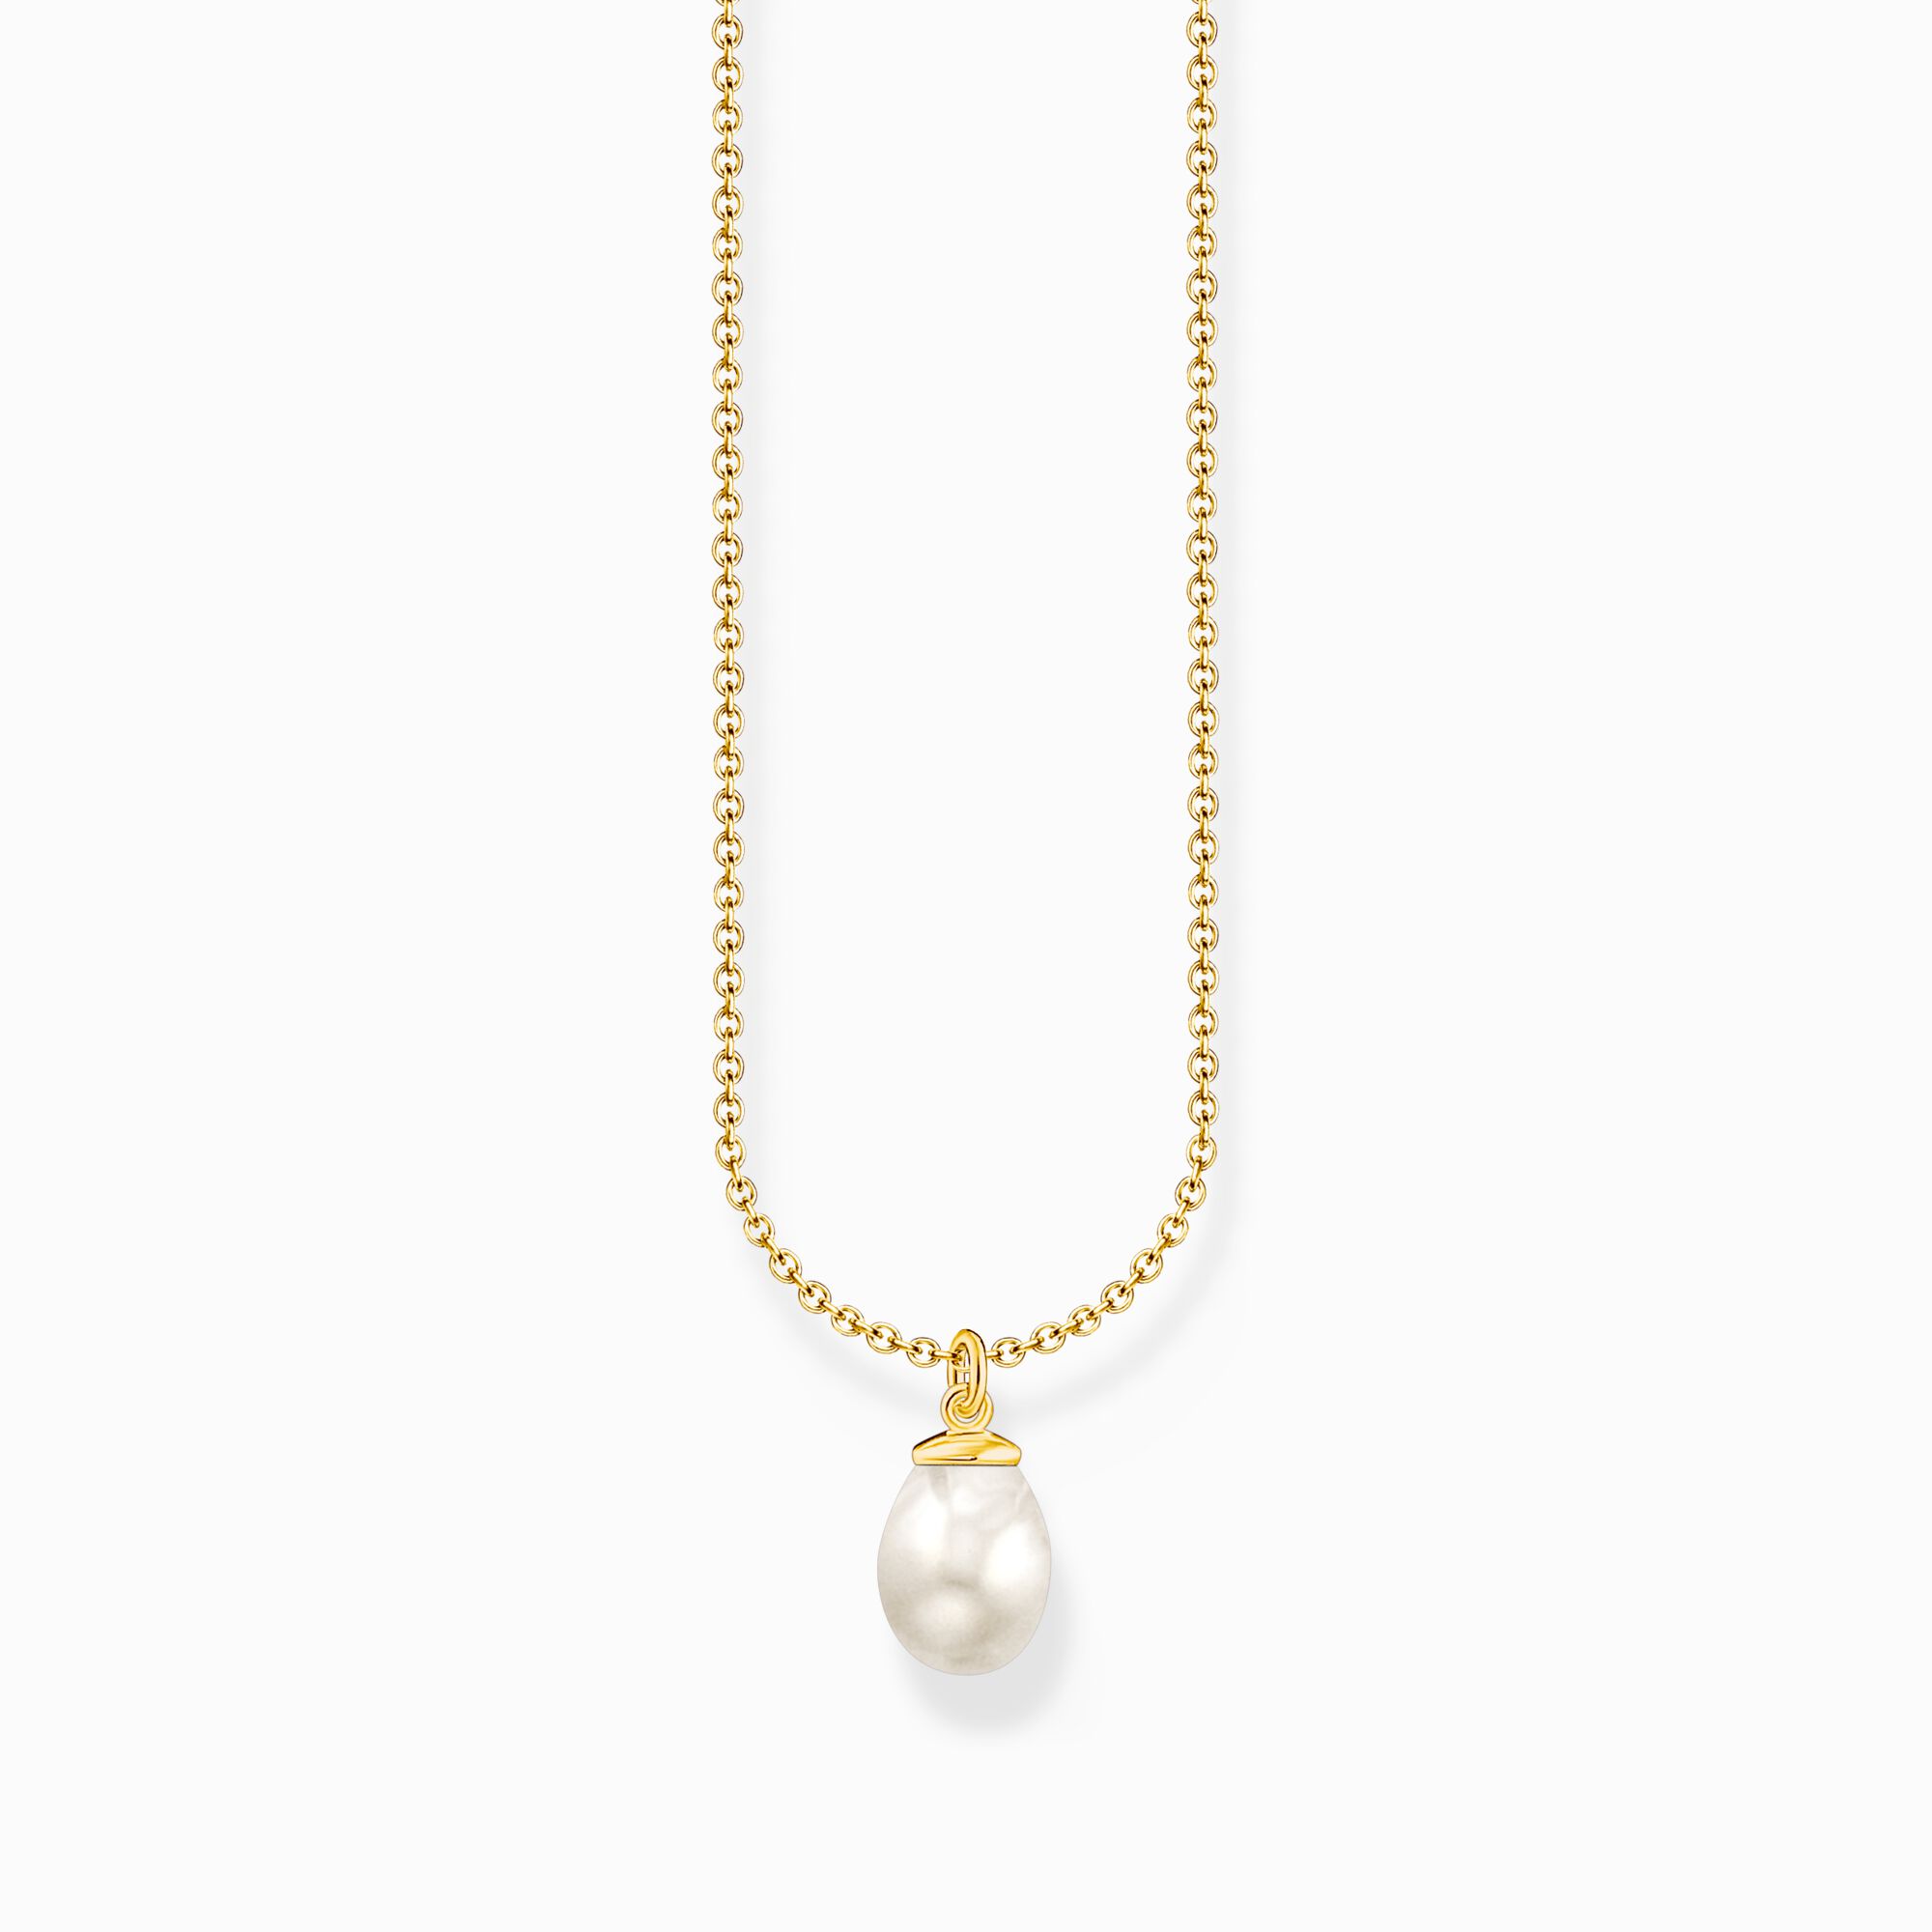 Gold-plated necklace with freshwater pearl pendant from the Charming Collection collection in the THOMAS SABO online store